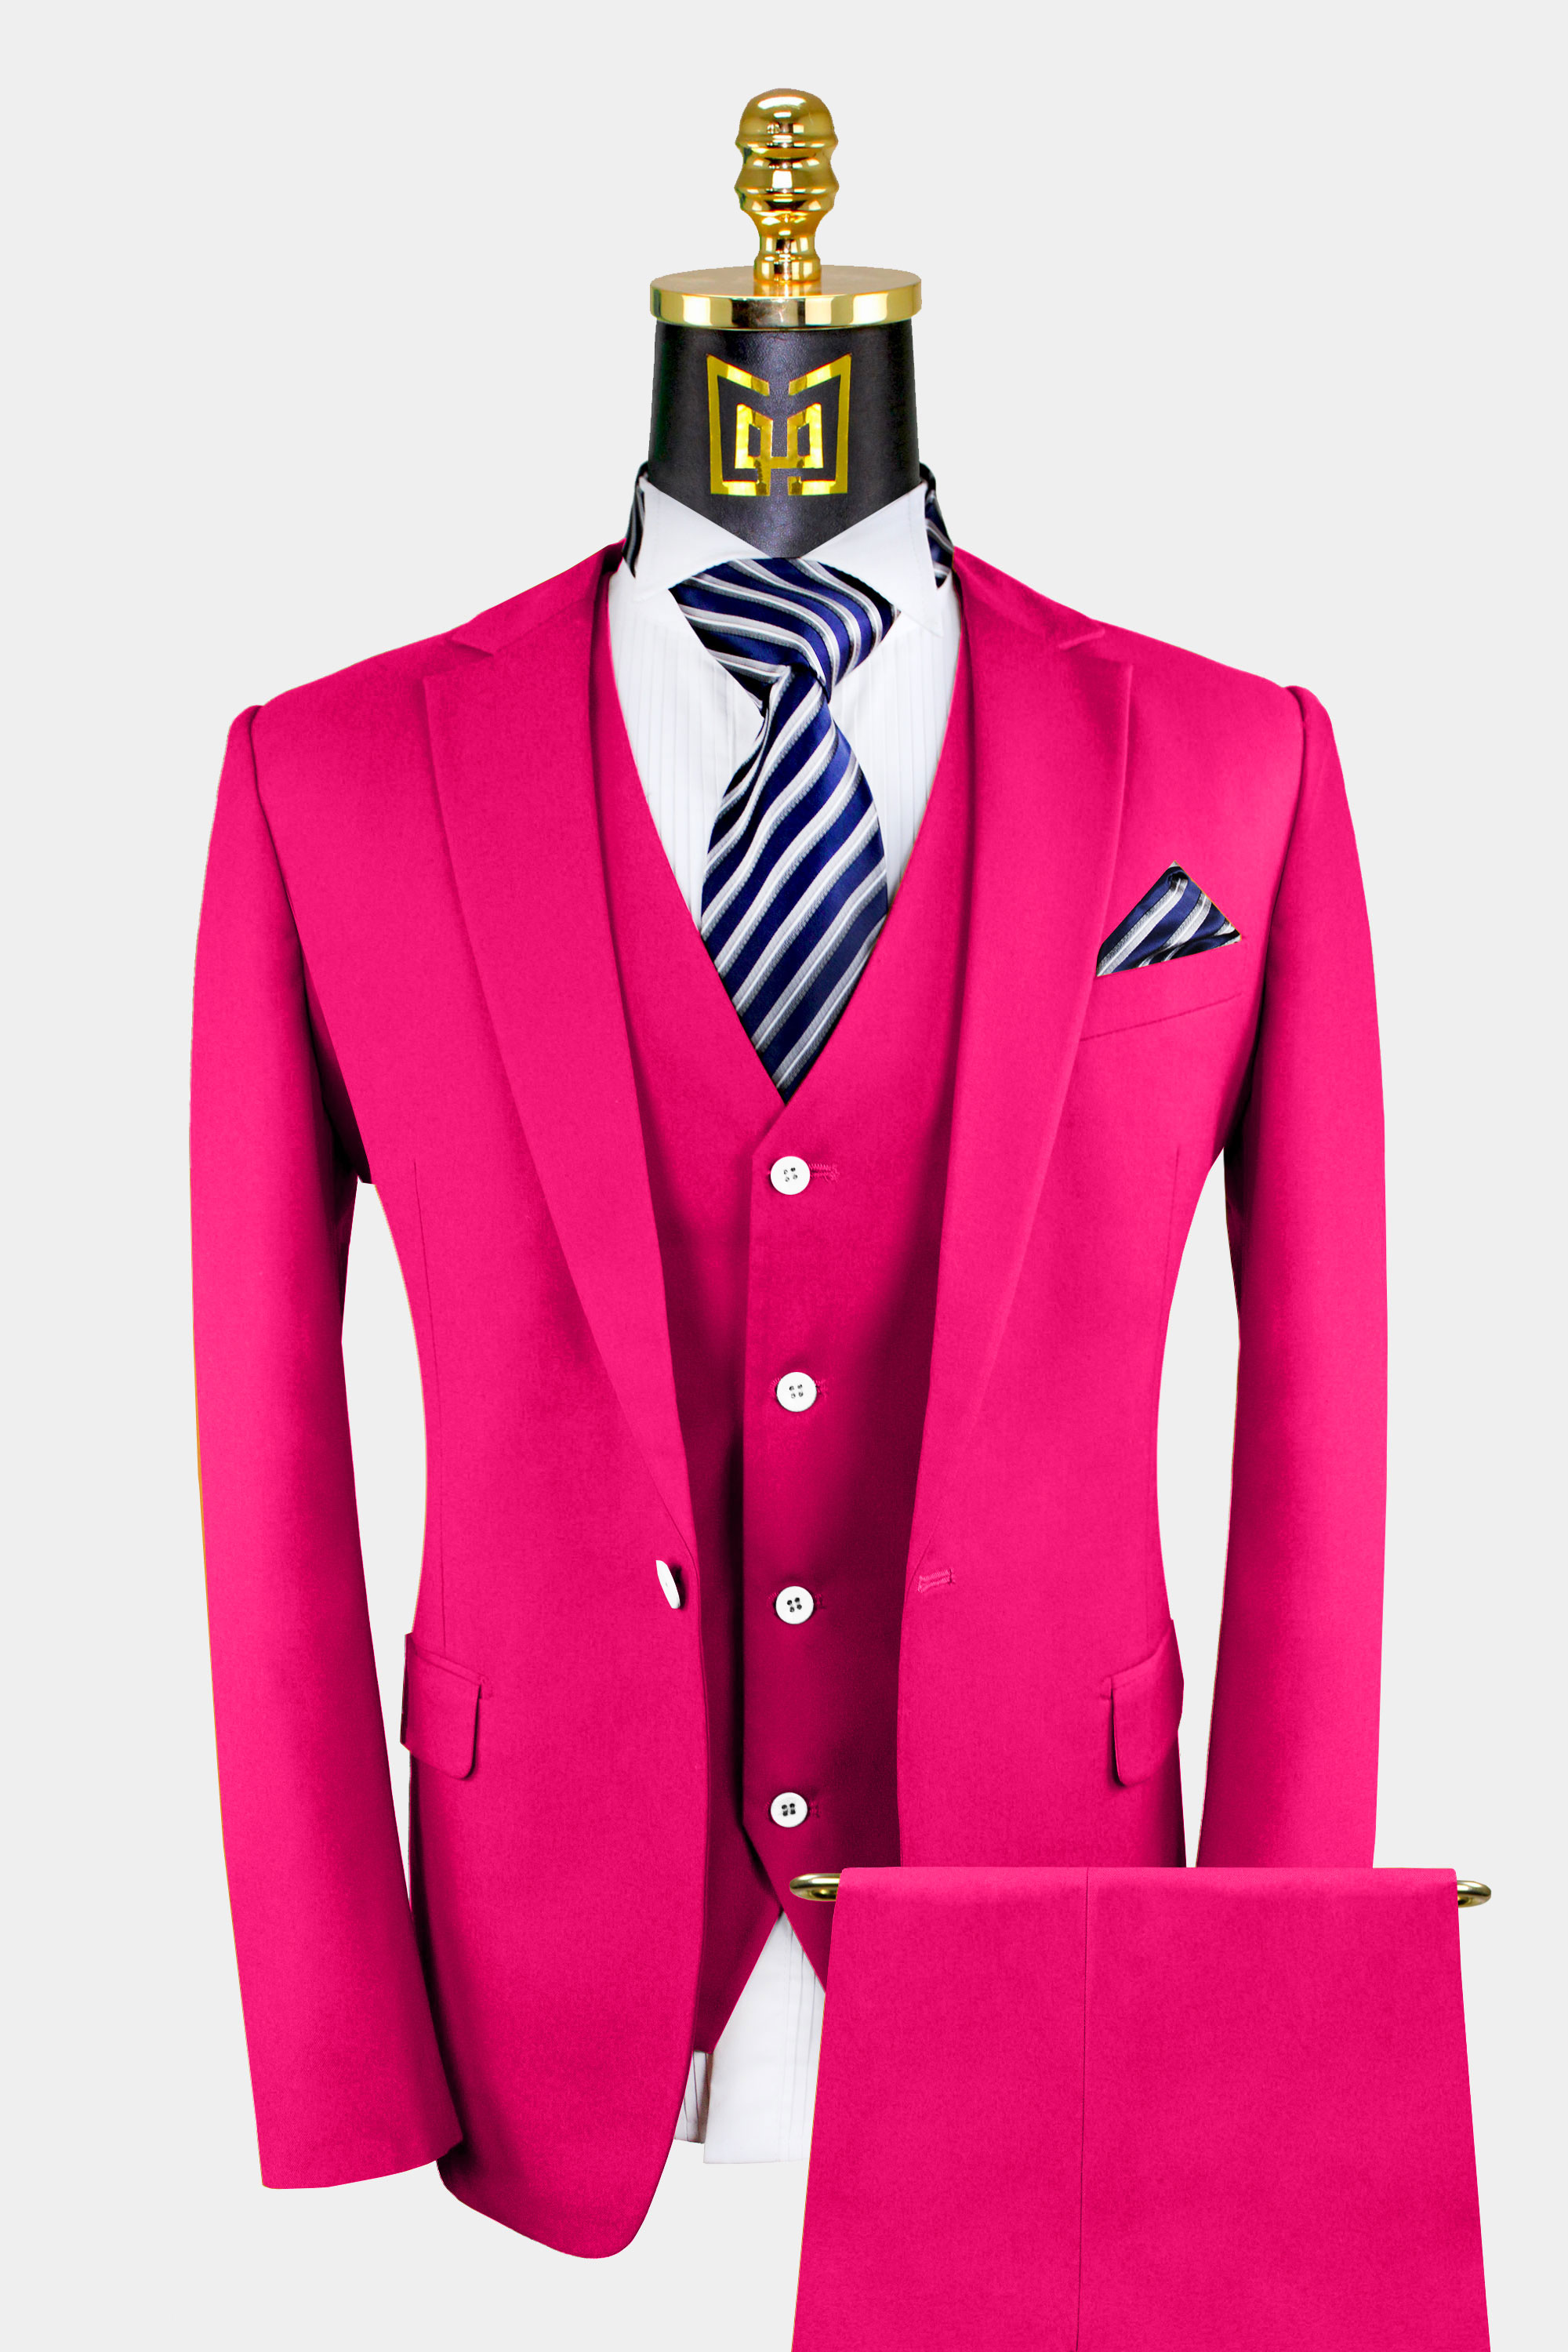 Men's SuitMeister Basic Pink Suit Costume | lupon.gov.ph